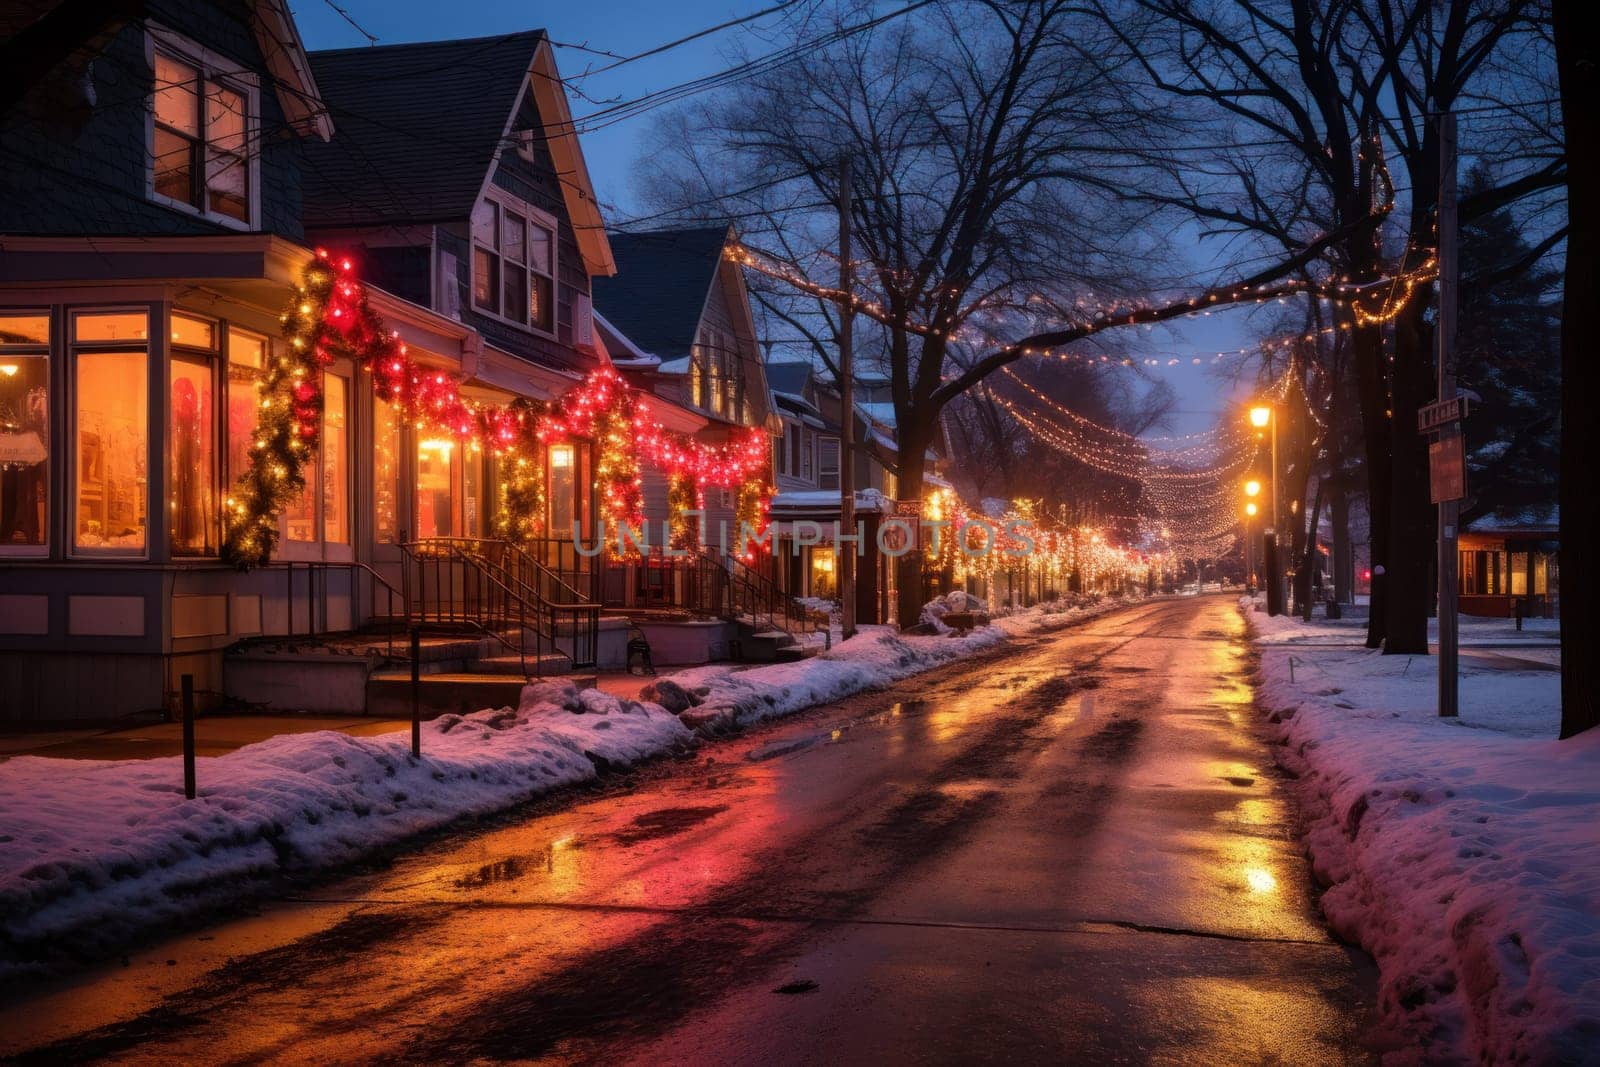 An enchanting portrayal of the holiday season, featuring the dazzling brilliance of Christmas lights, ornaments, and festive adornments that transform towns and neighborhoods into magical wonderlands.